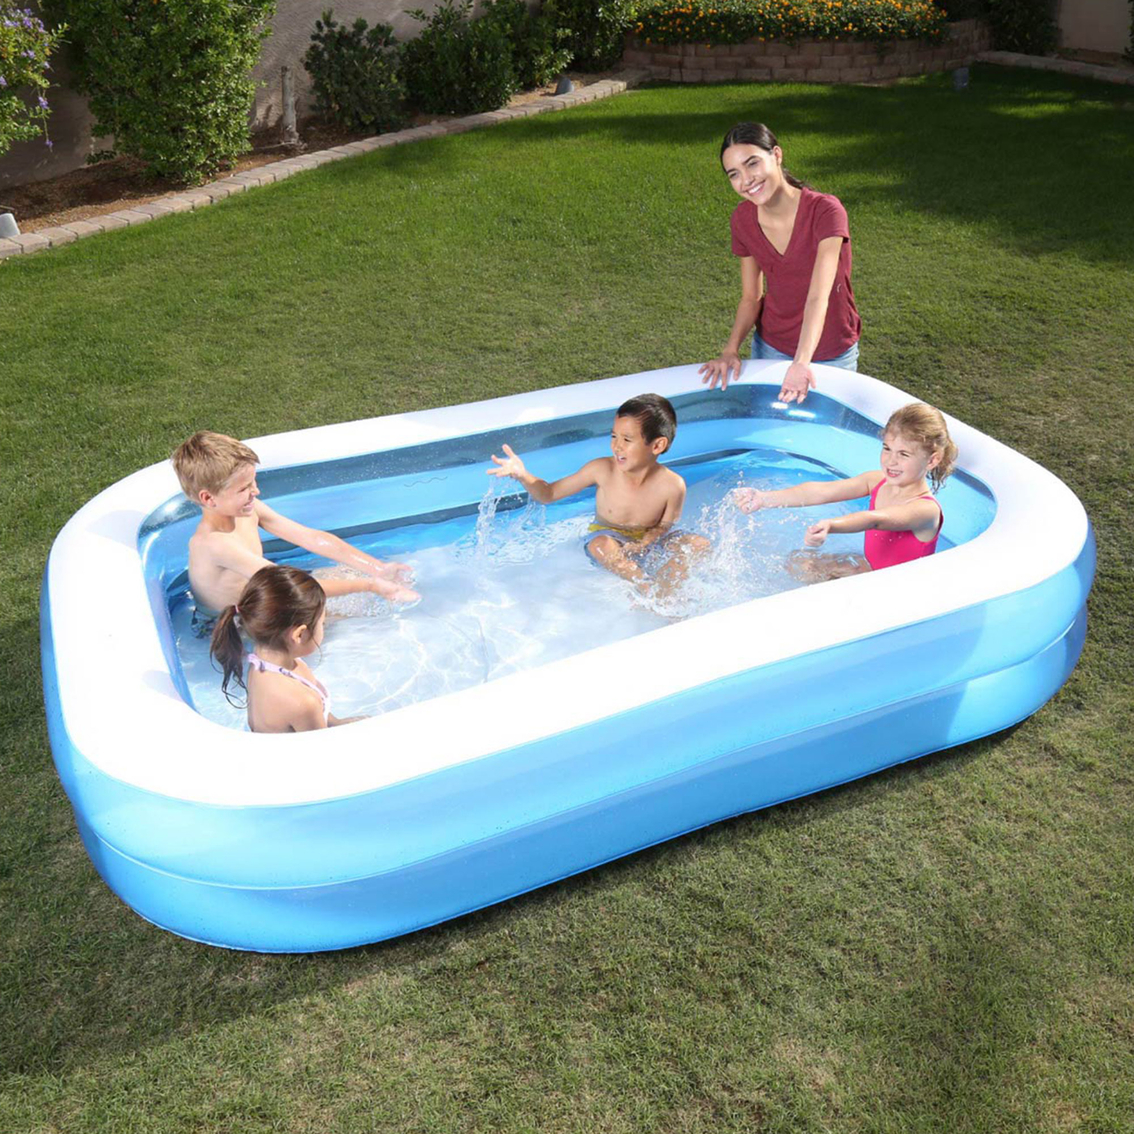 Bestway Blue Rectangular Family Pool, 8.5 ft. x 69 in. x 20 in. - Image 4 of 4